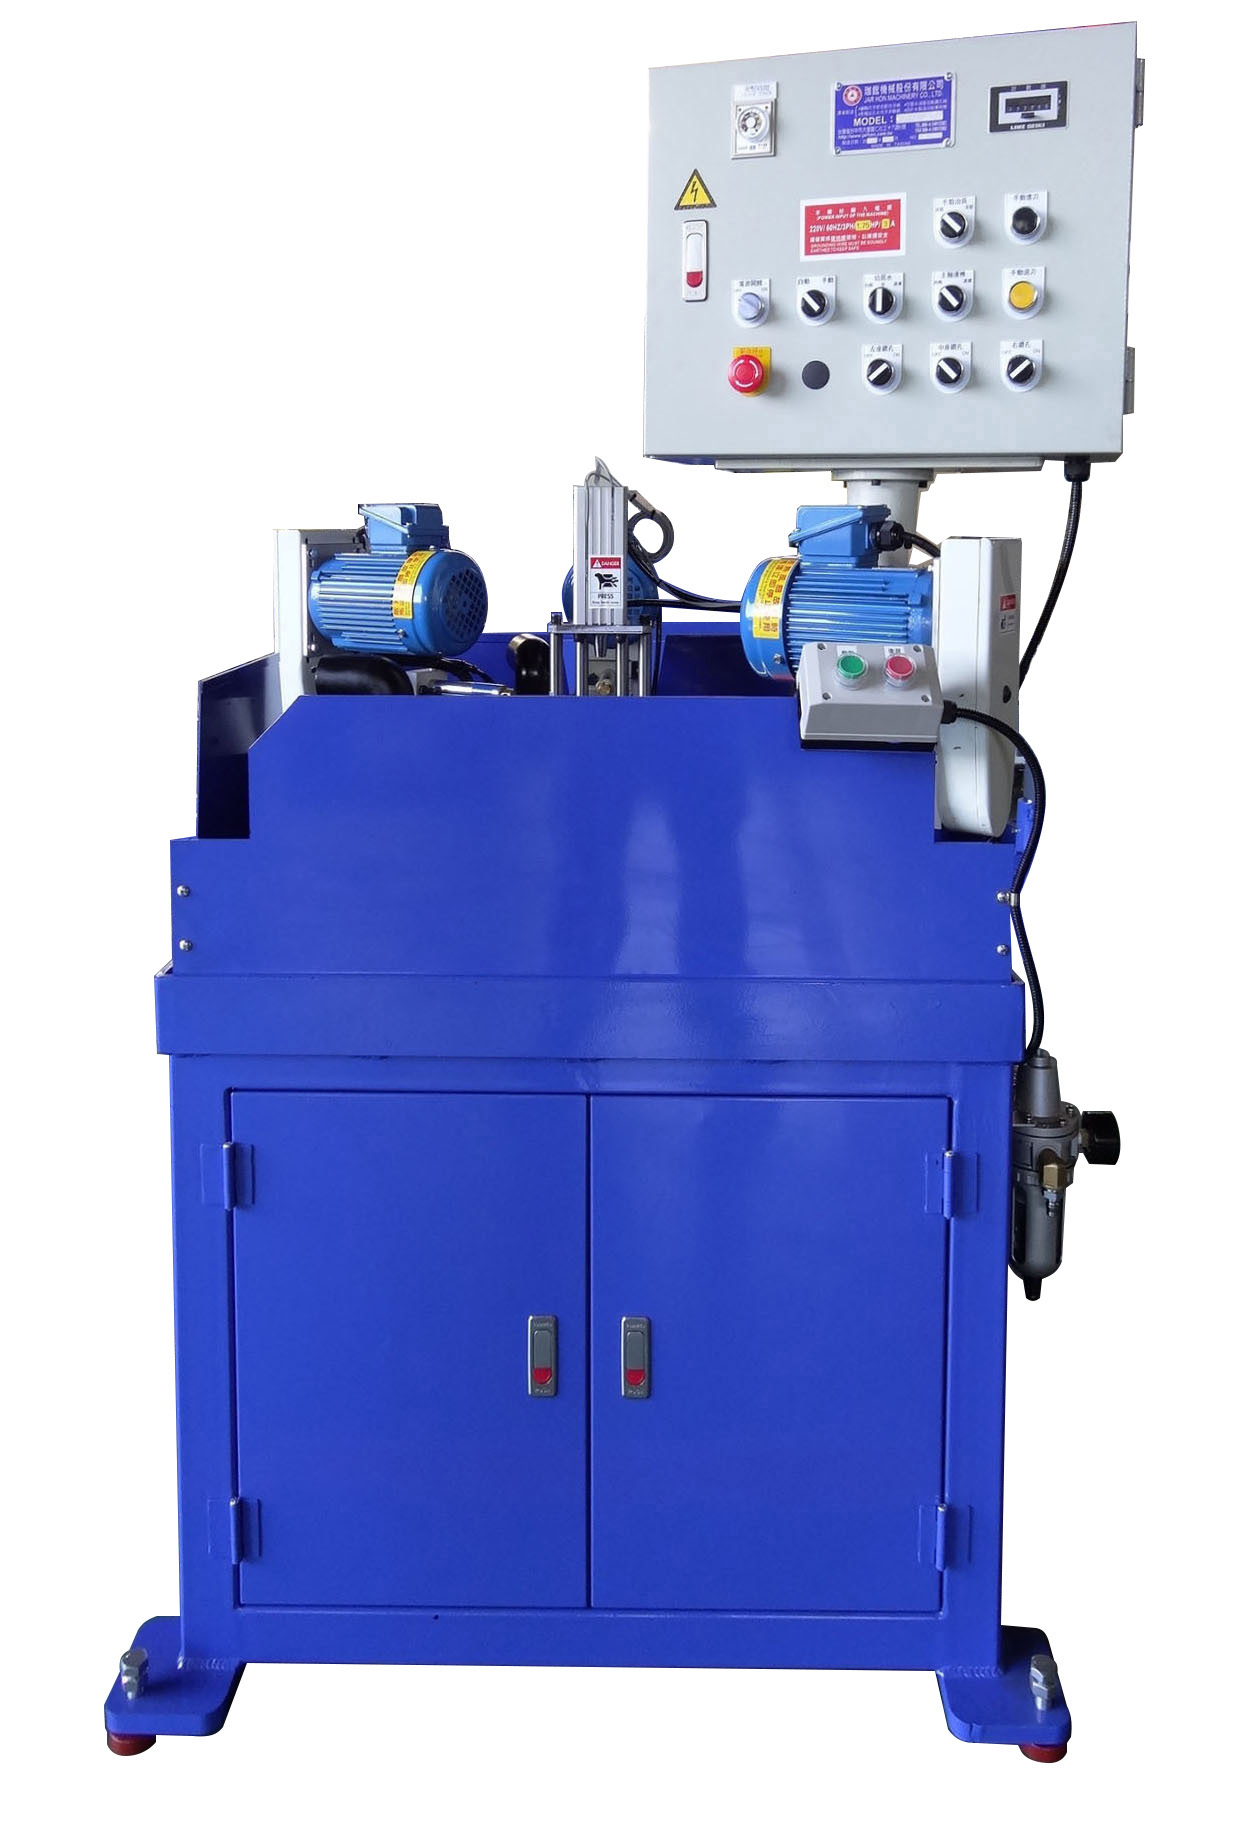 Triple station special purpose machine for drilling